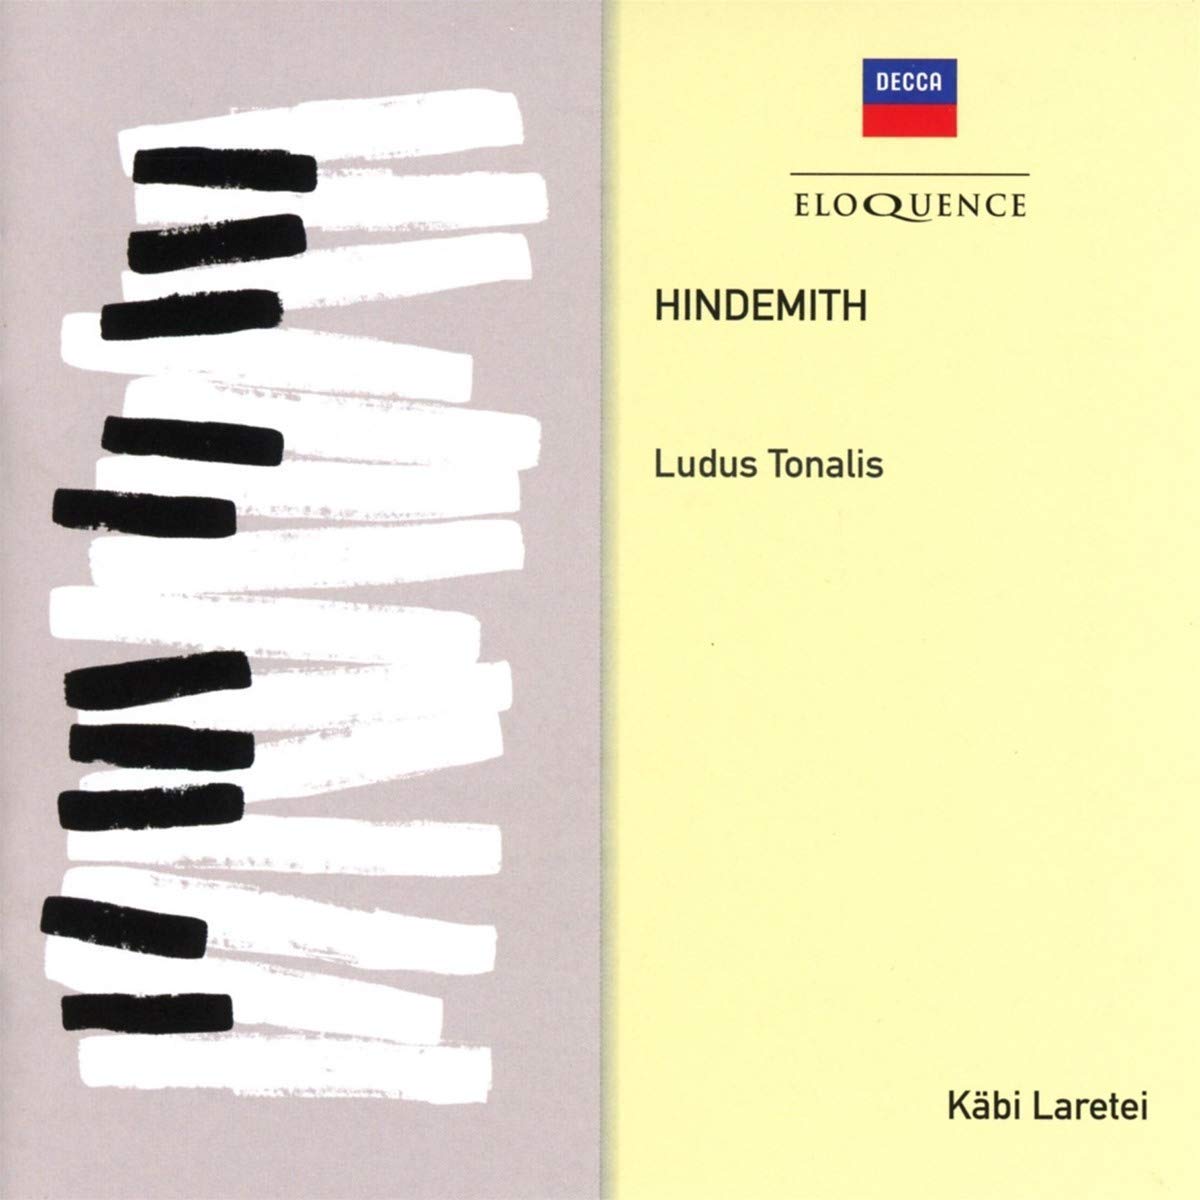 Hindemith Eloquence